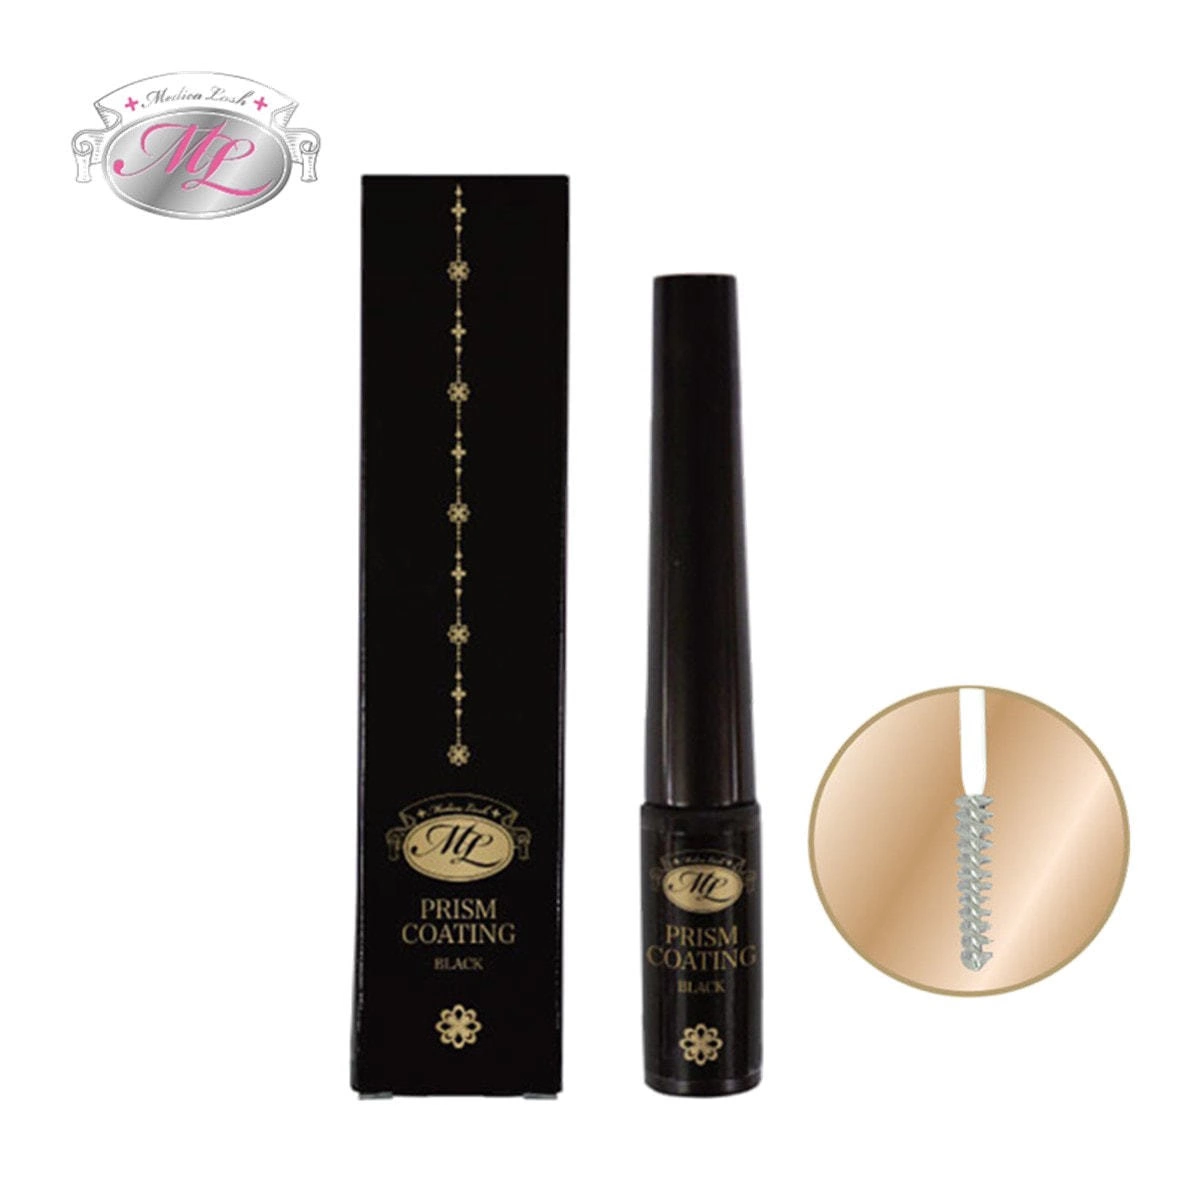 Contains hyaluronic acid_Prism coating black (brush type)